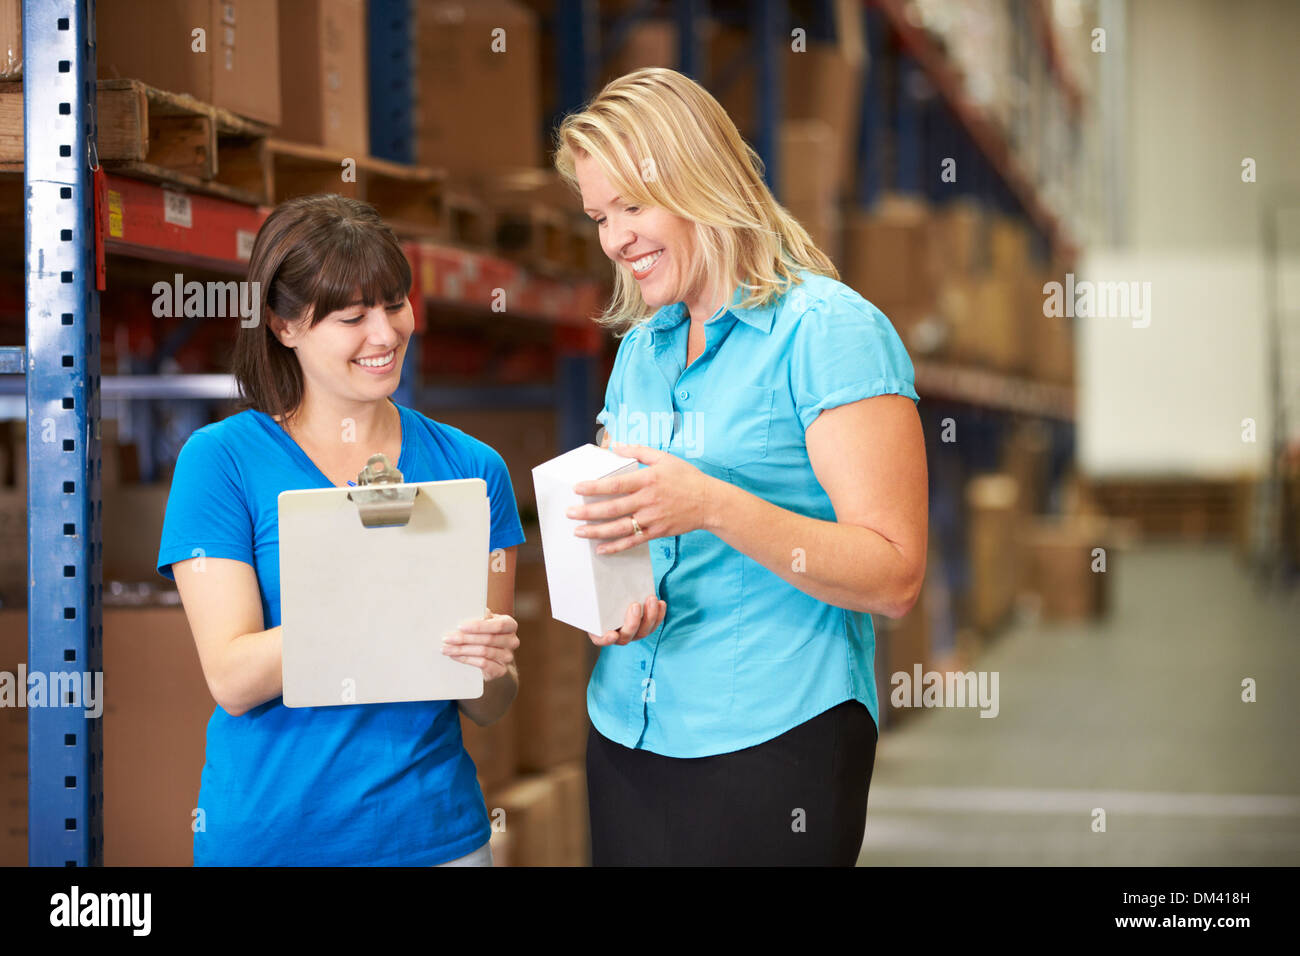 Businesswoman And Female Worker In Distribution Warehouse Stock Photo